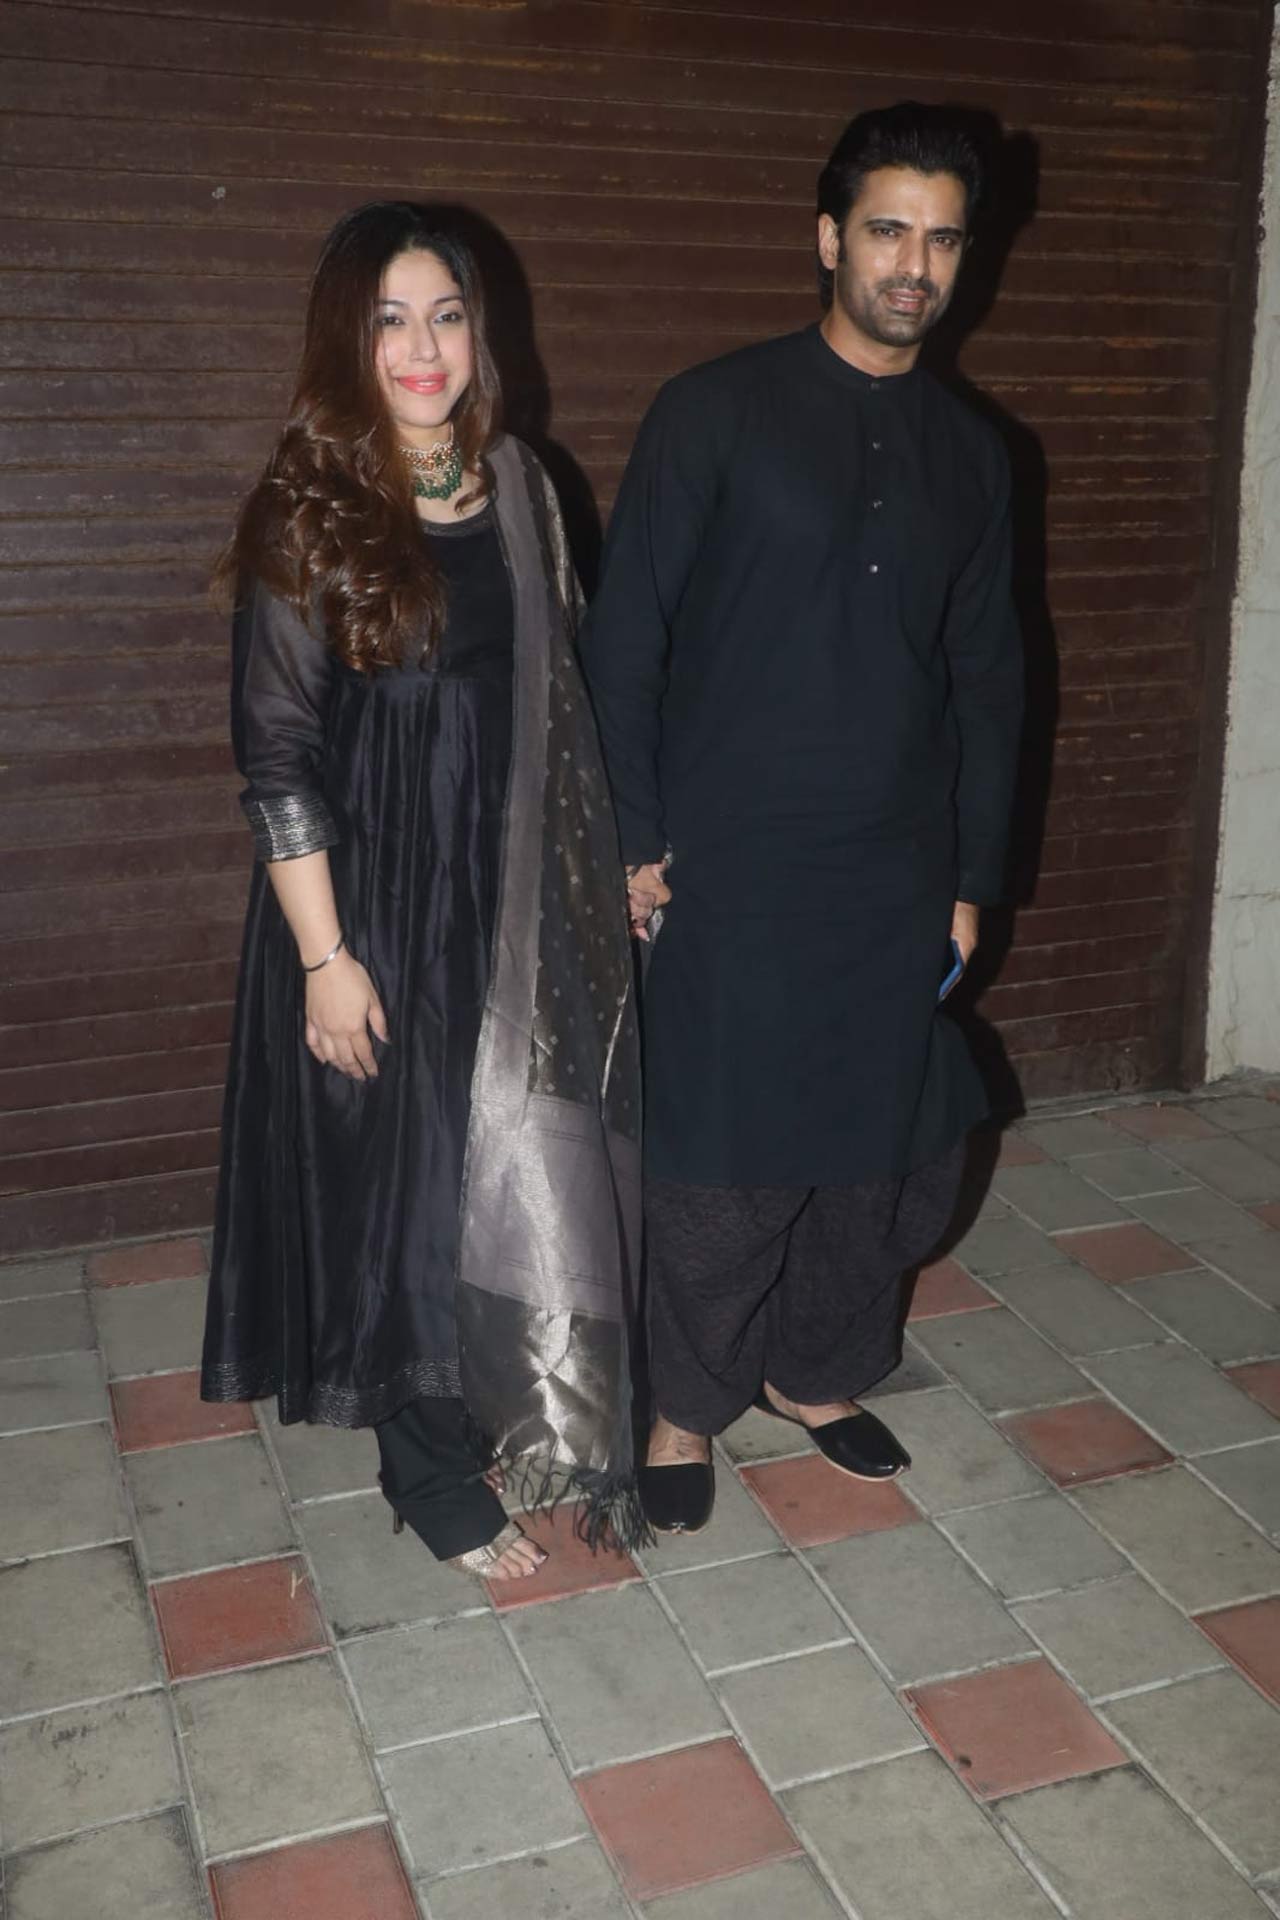 Aditte Malik and her husband Mohit were snapped twinning in black as they attended Sandiip Sickand's Diwali celebration.